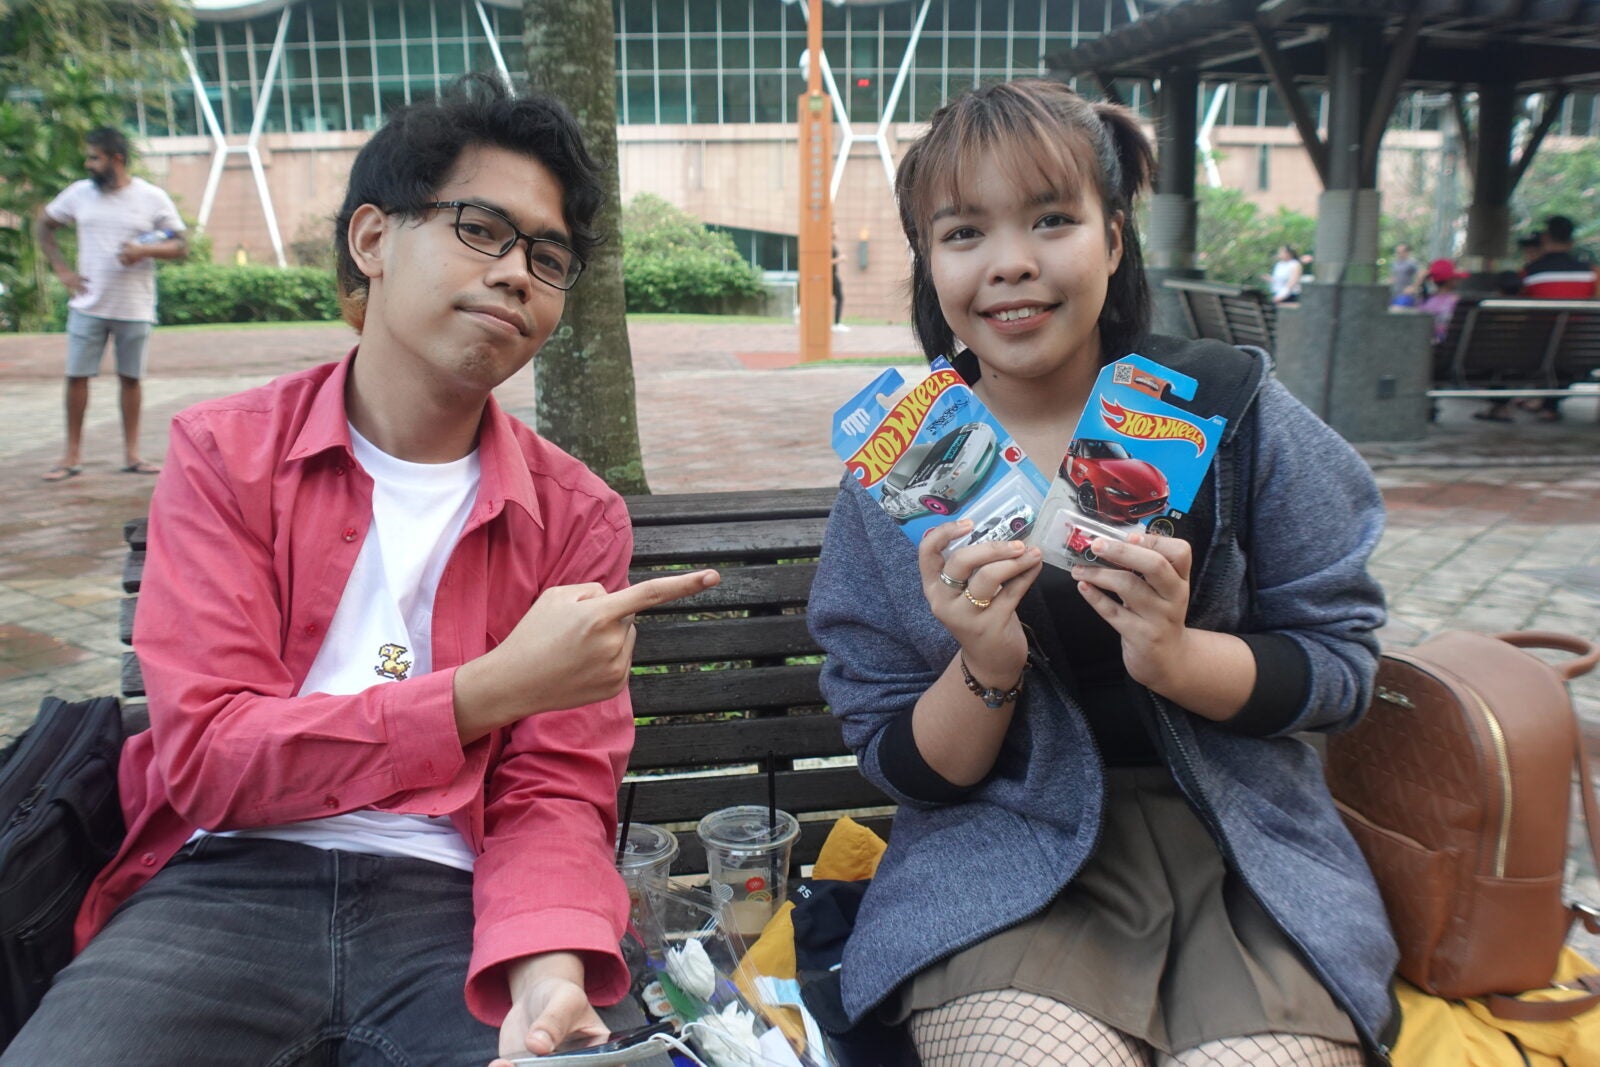 A man points to a woman beside him as she poses with a couple of HotWheels that are still in package.